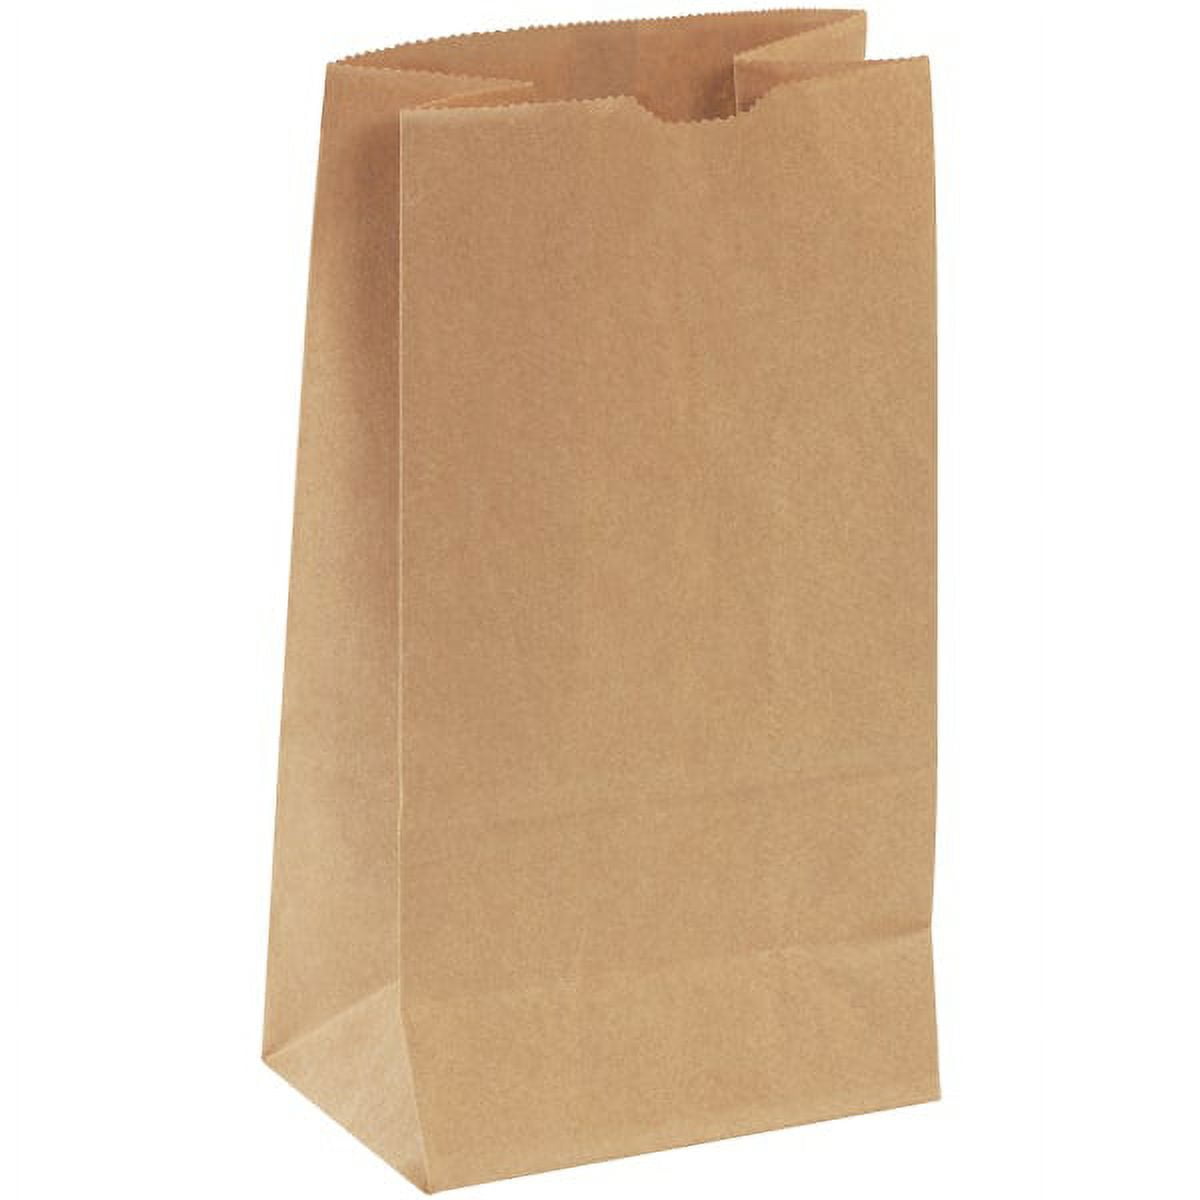 Picture of Box Partners BGH122K Kraft Hardware Bags - 4.75 x 2.312 x 8.56 in.